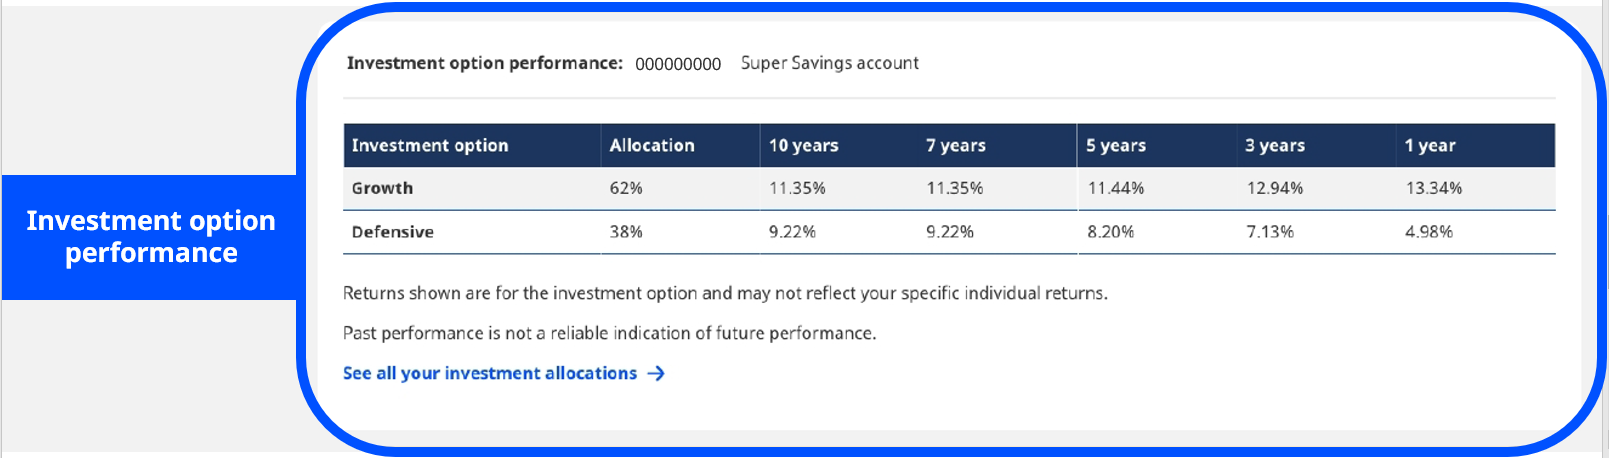 Investment information screen image